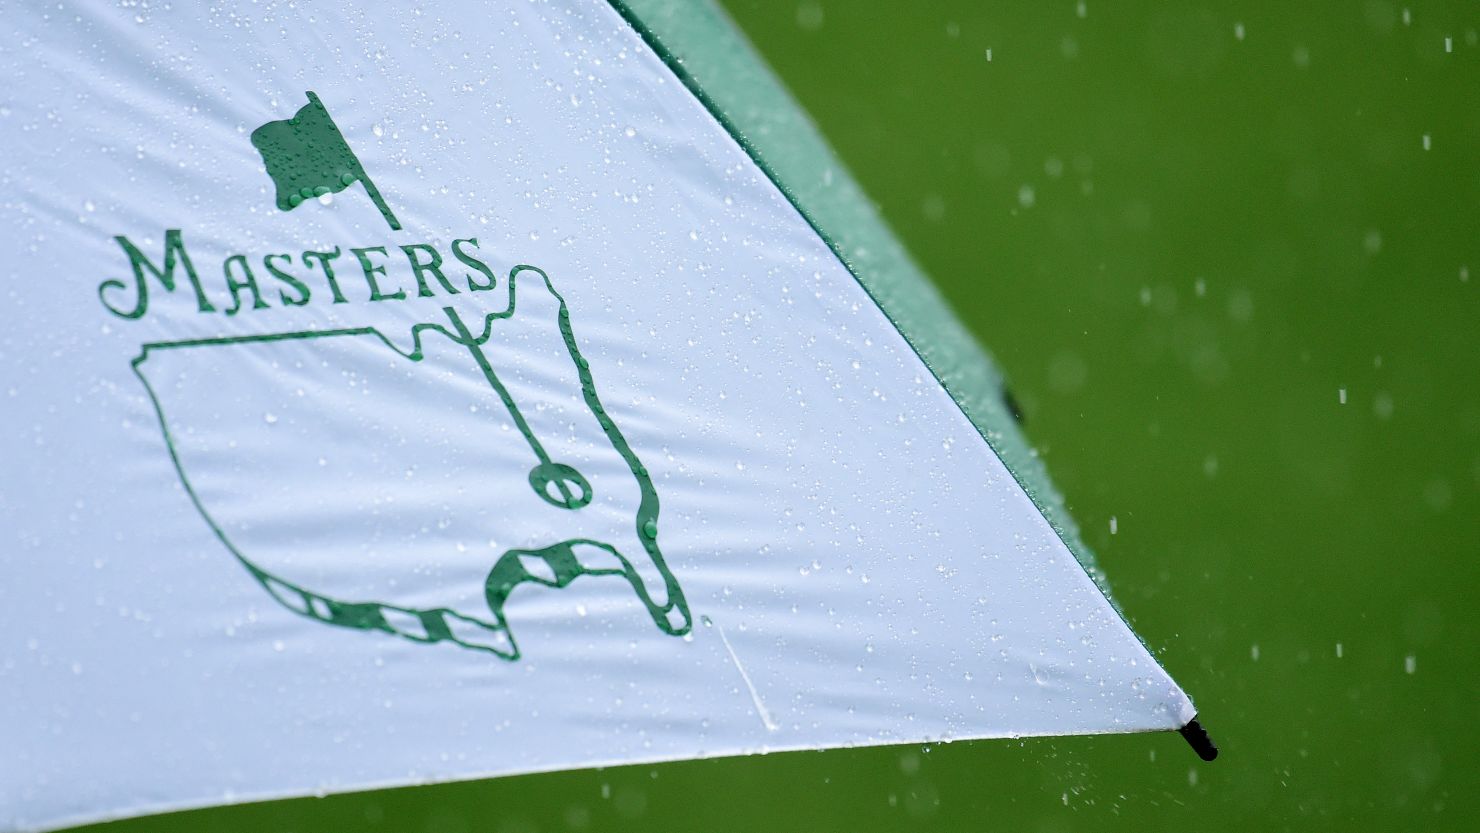 Rain falls this week during a practice round before the Masters Tournament's start in Augusta, Georgia.